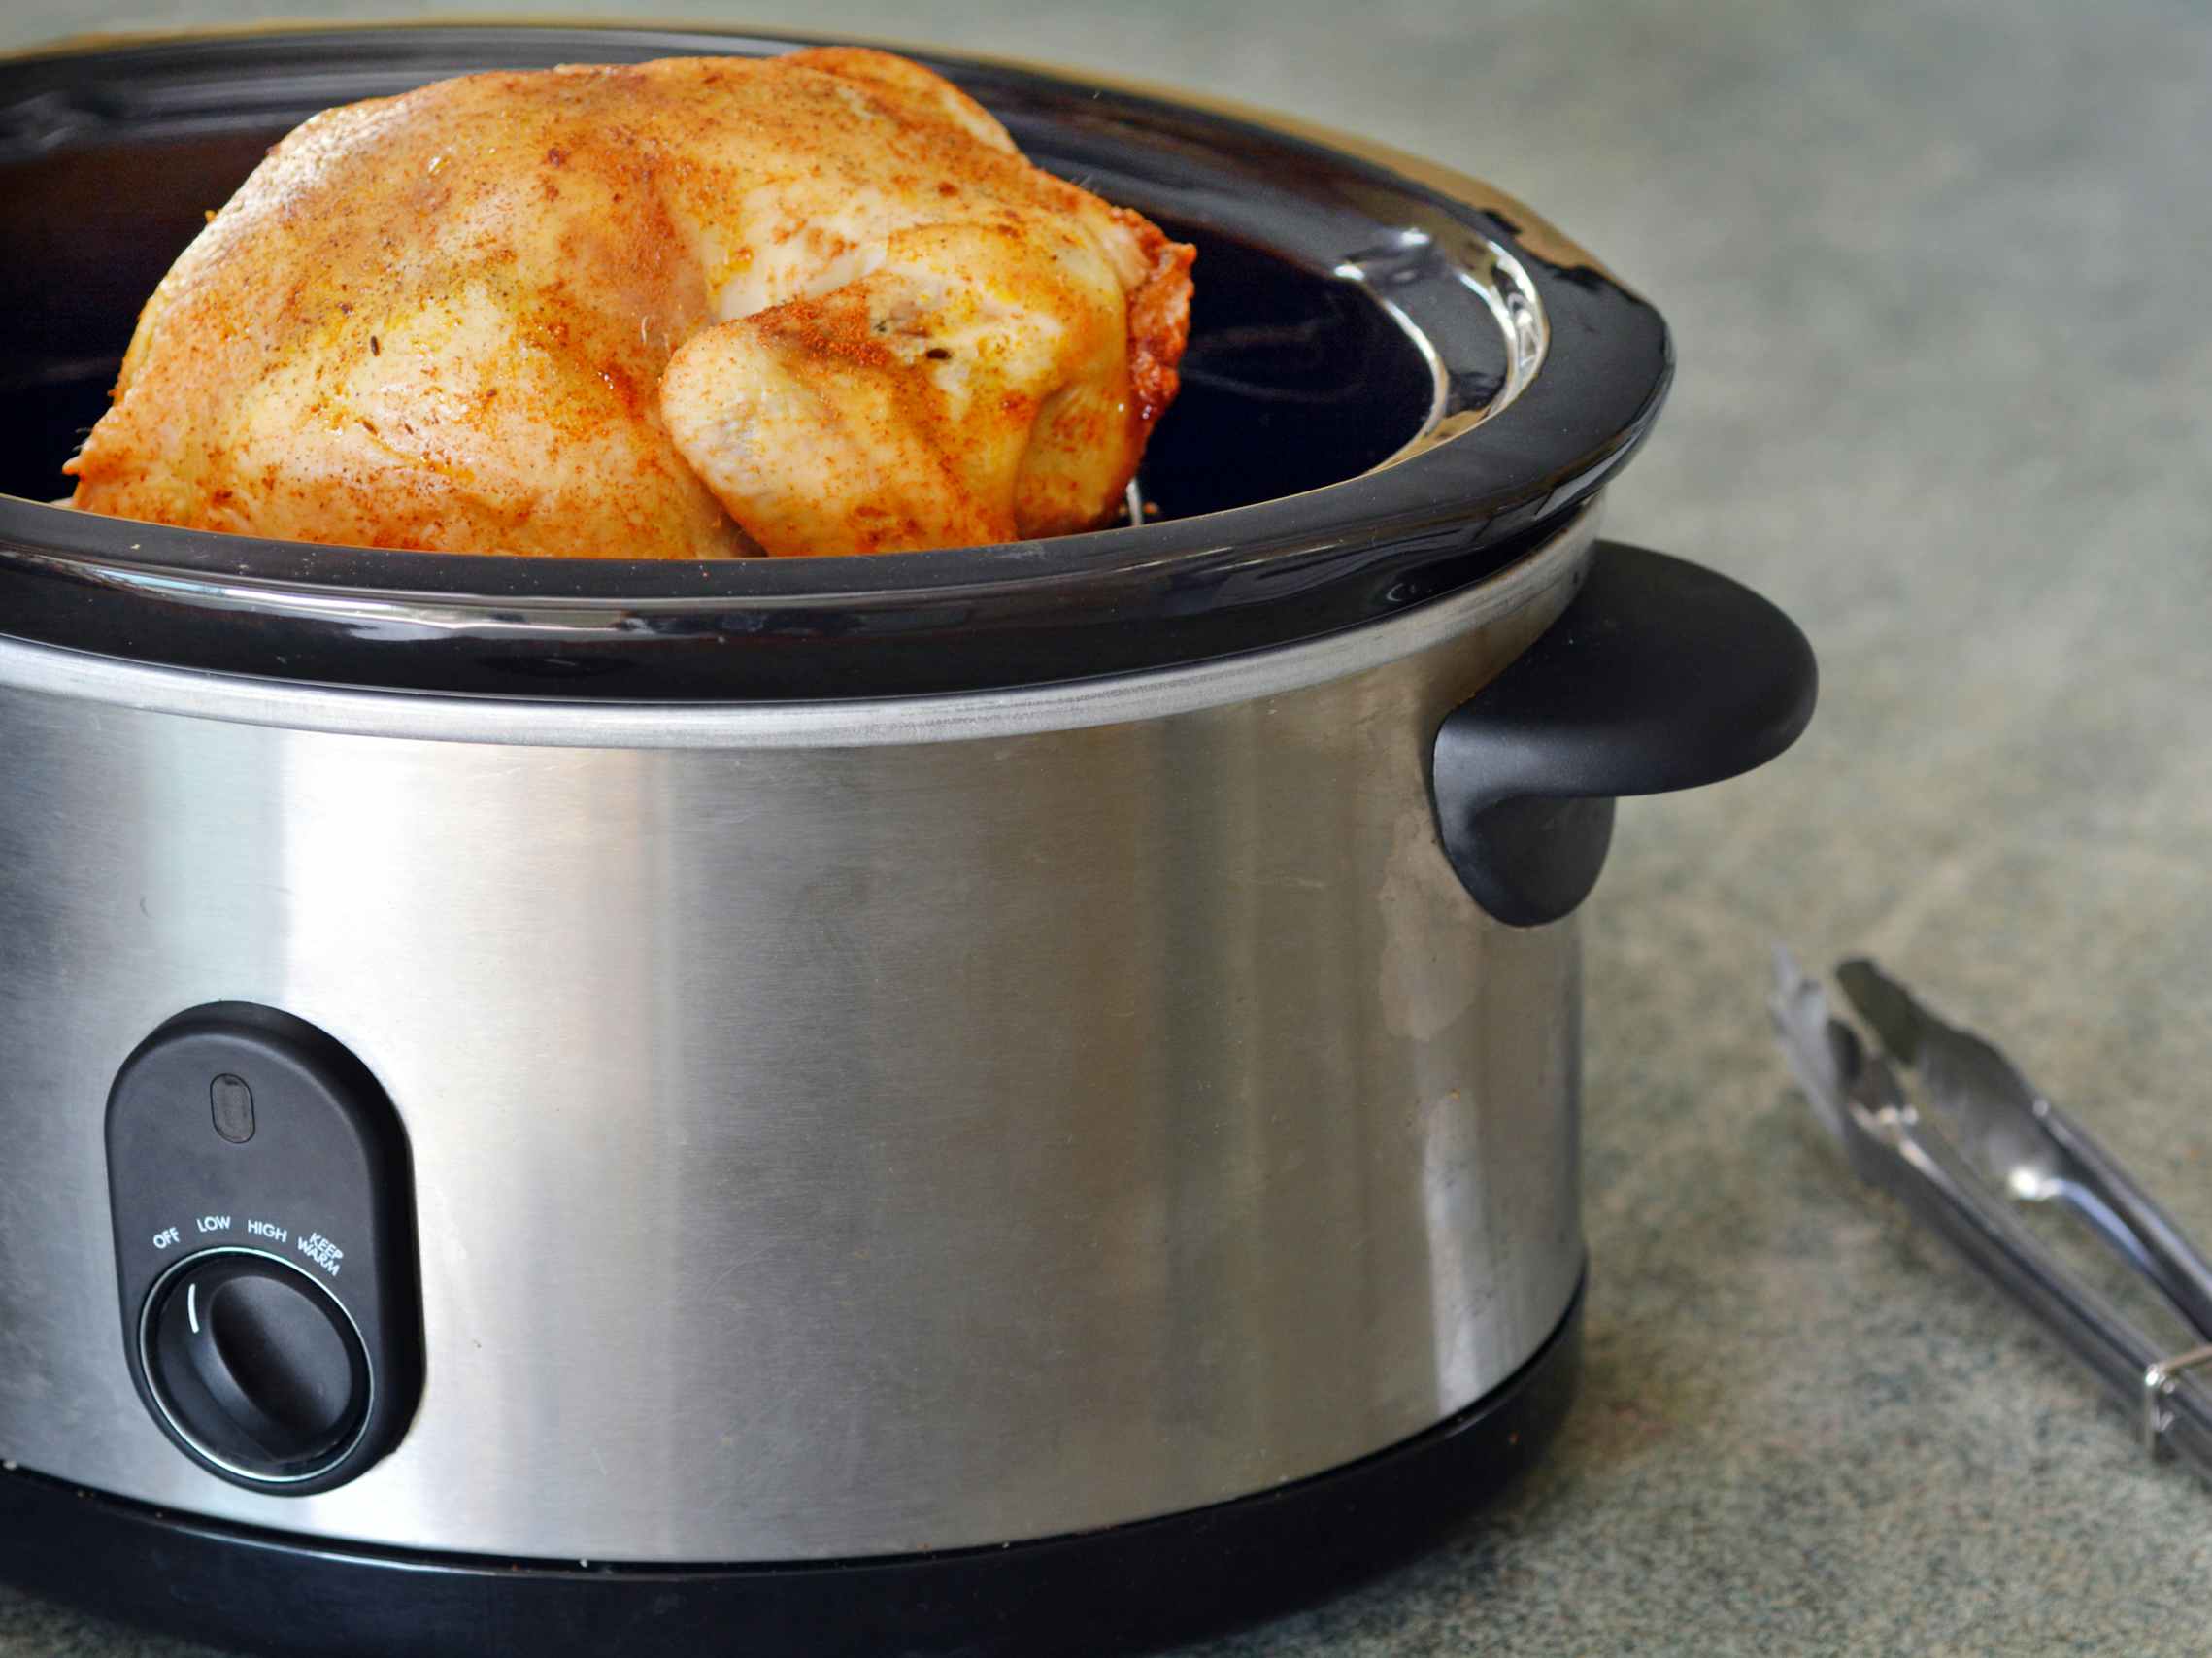 A whole chicken cooking in a slow cooker.